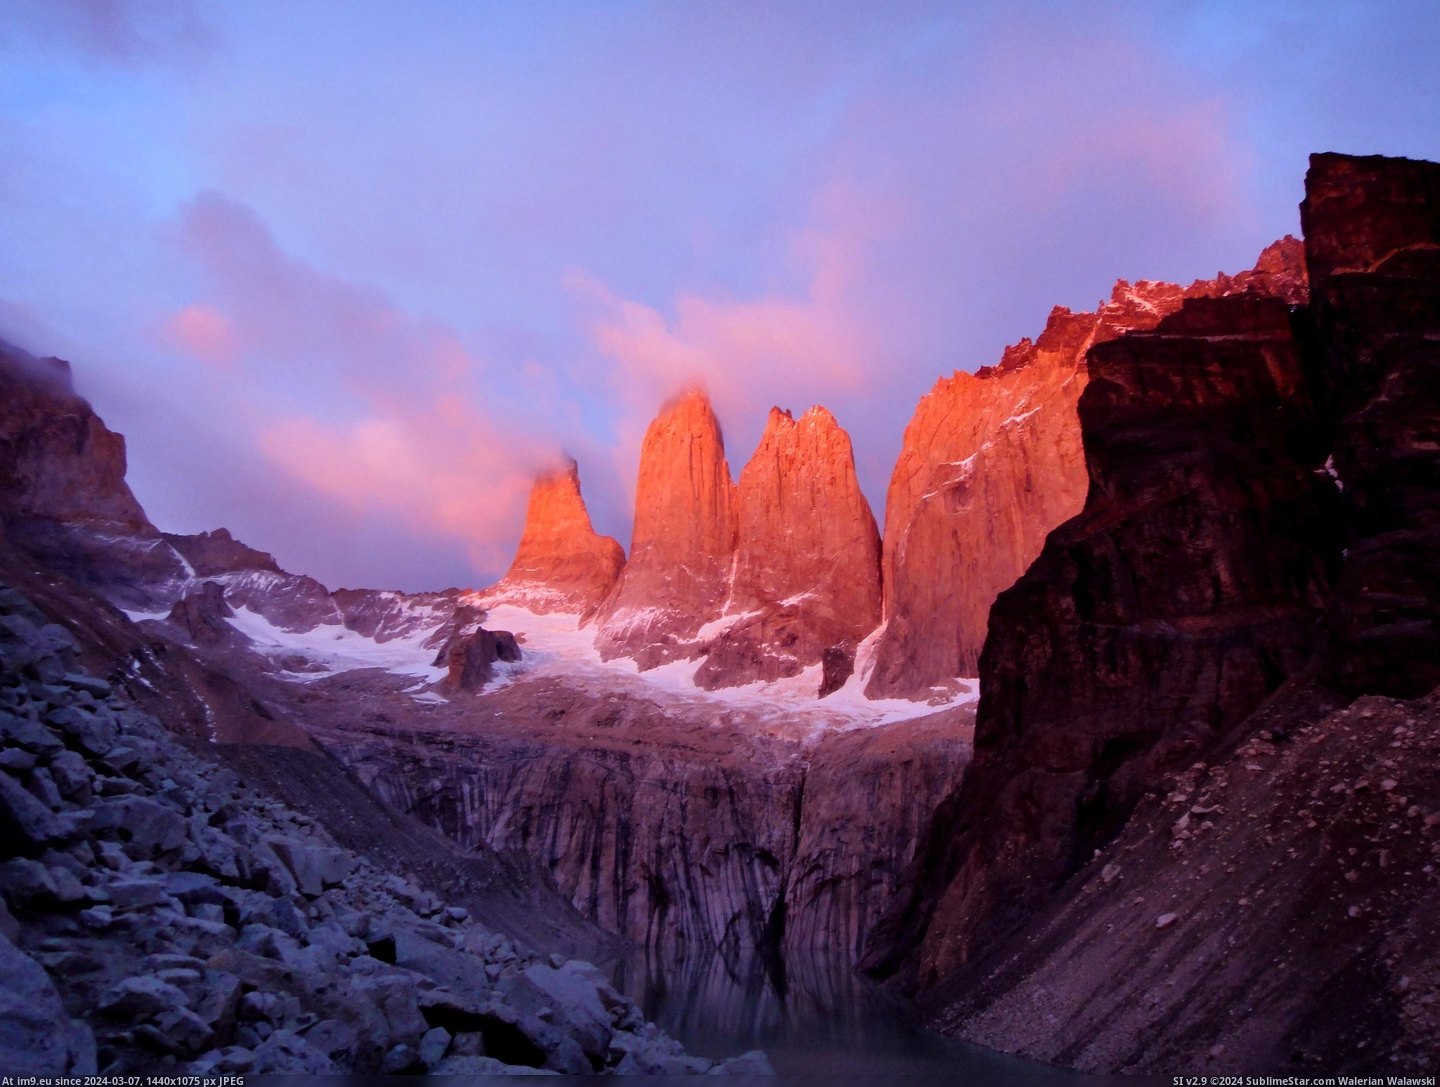 #Did #Place #Point #Sunrise #Hitting #Torres #Paine #Justic #Shoot #Famous #Del #Patagonia [Earthporn] Sunrise hitting the famous Torres del Paine in Patagonia. Not sure my little point & shoot did this place justic Pic. (Bild von album My r/EARTHPORN favs))